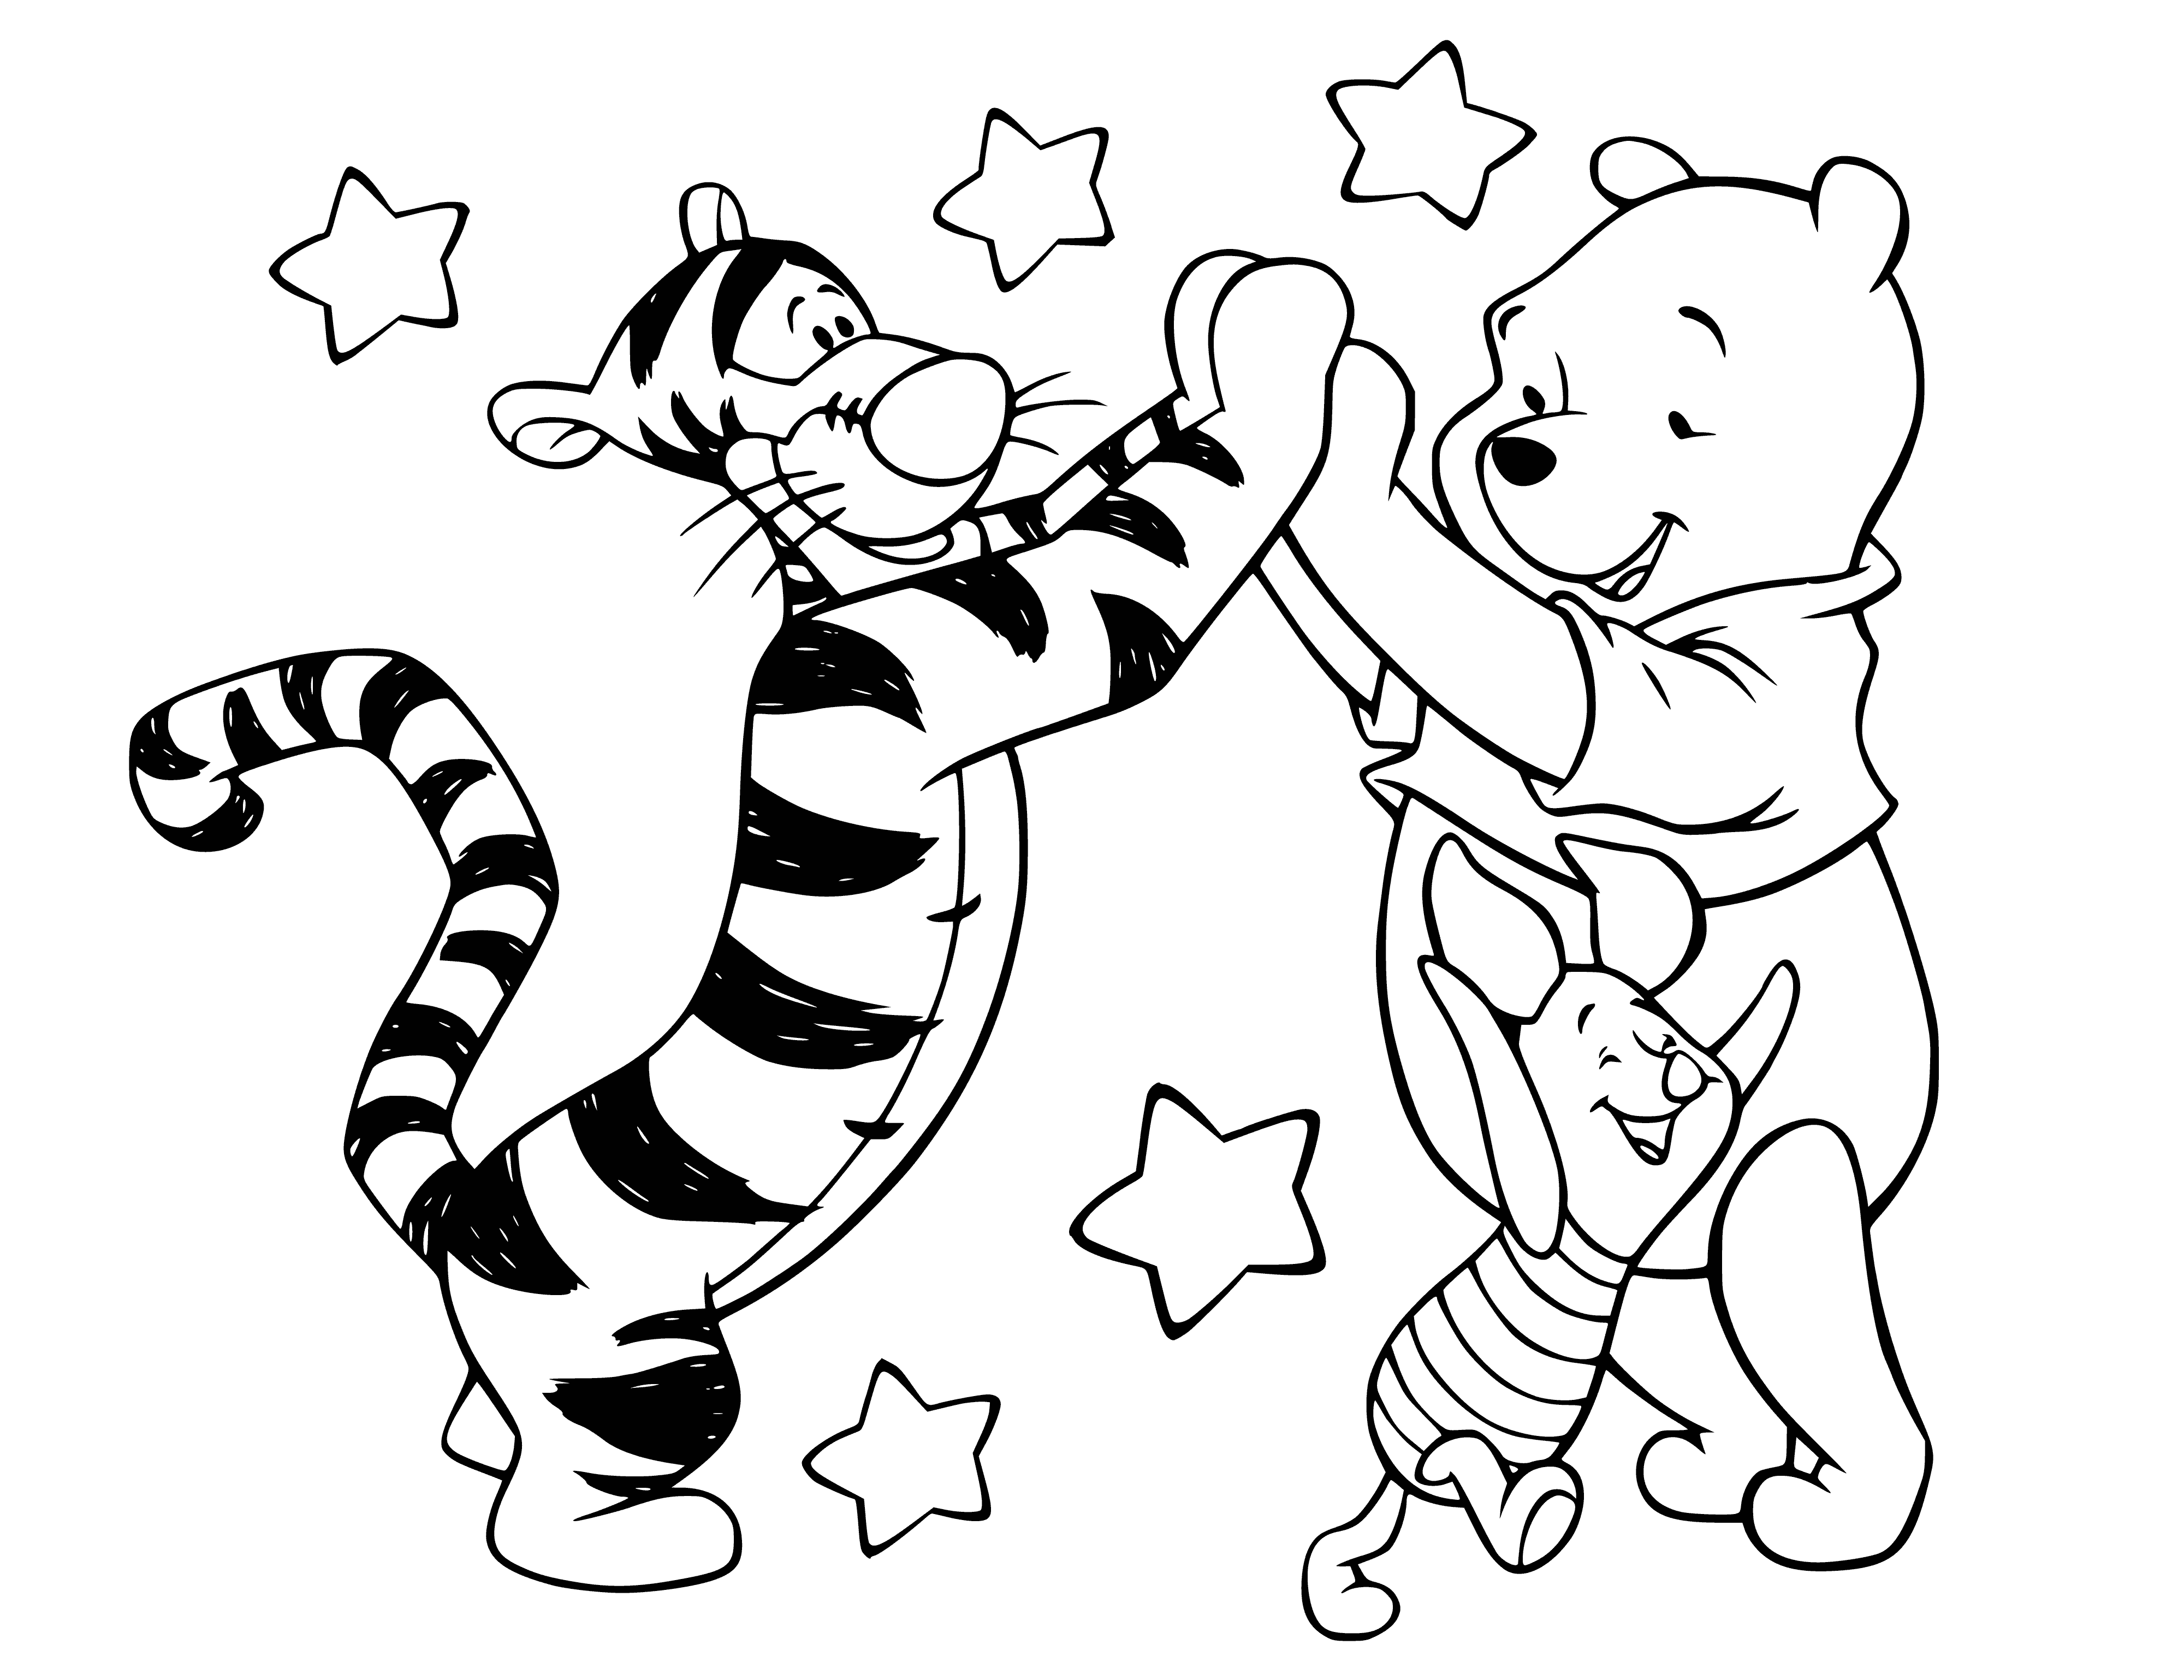 coloring page: 5 animals- bear, honey pot, rabbit, bird & tiger- gather around a bear in the middle who is wearing a red shirt.